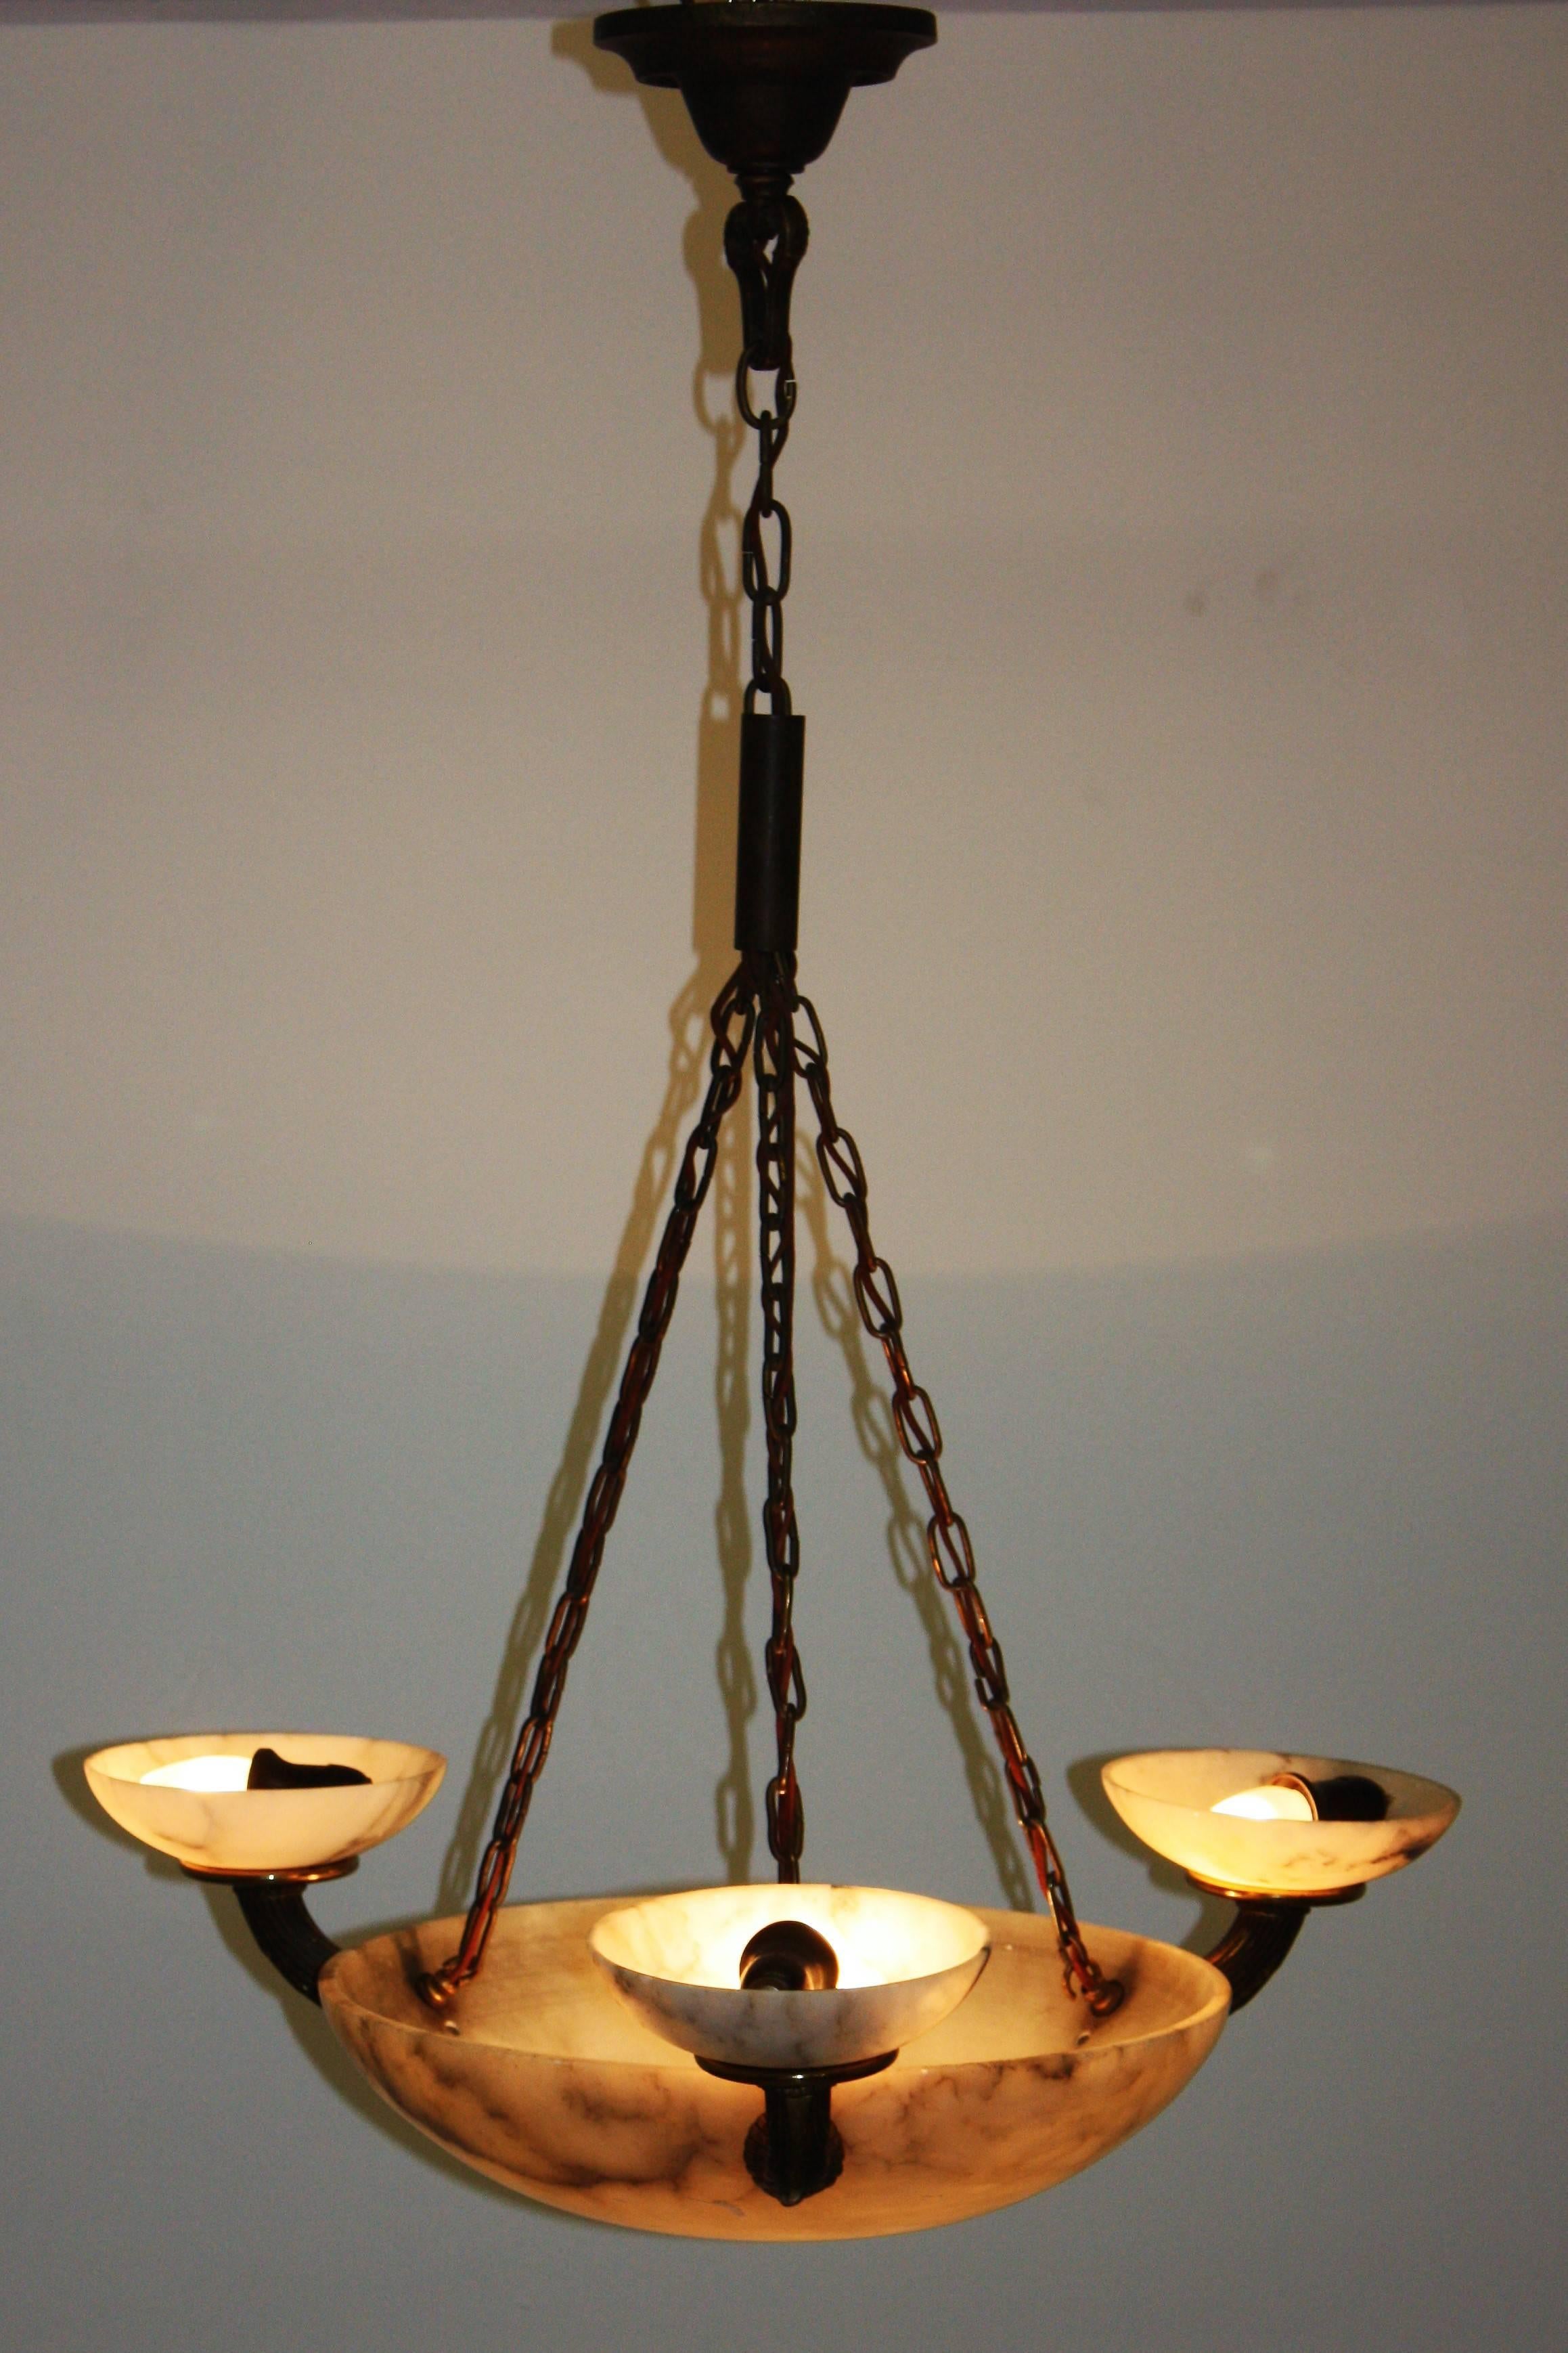 Stunning four-light alabaster and solid bronze pendant, circa 1900s.
Large round shade with three bronze arms and brass frame (fine patination).
Socket: Four x E27 (Edison) for standard bulbs.
With original wiring.